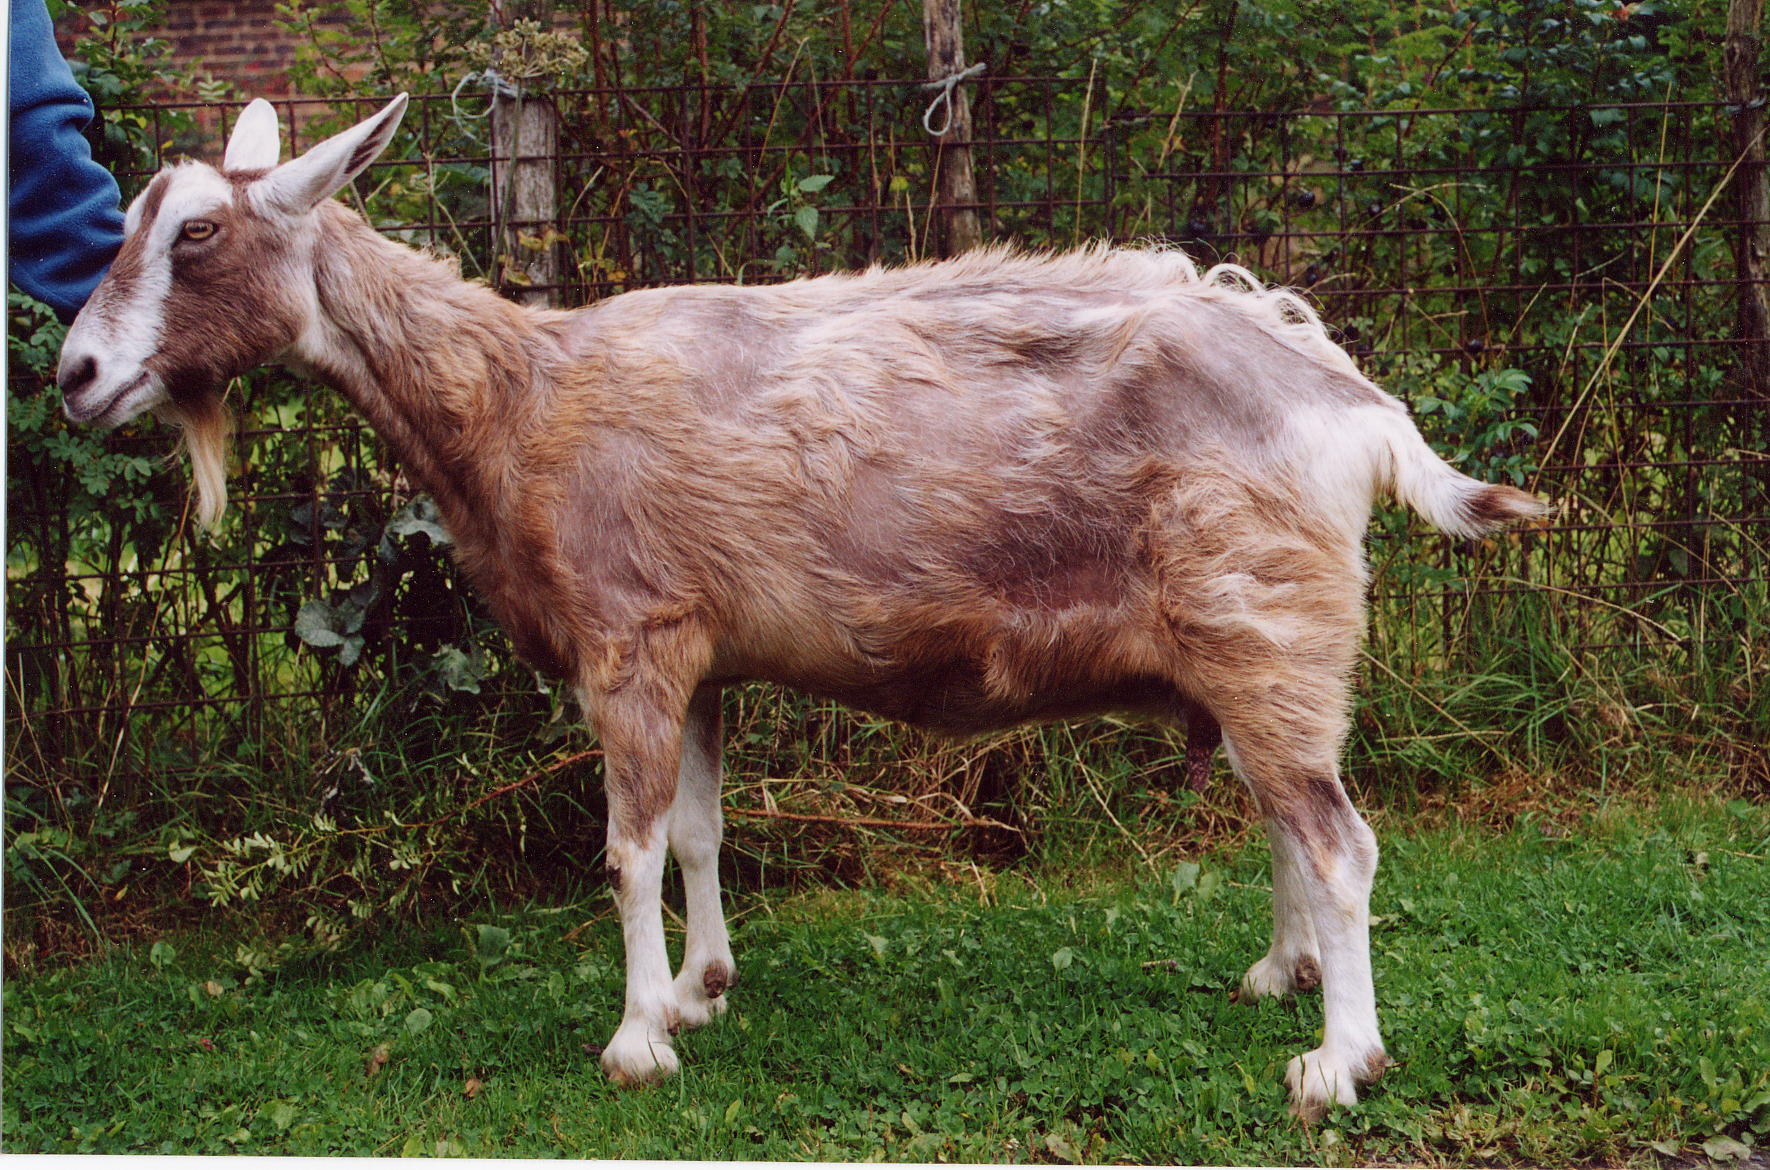 A goat with considerable hair loss resulting from itching due to mites, which can cause skin problems in goats